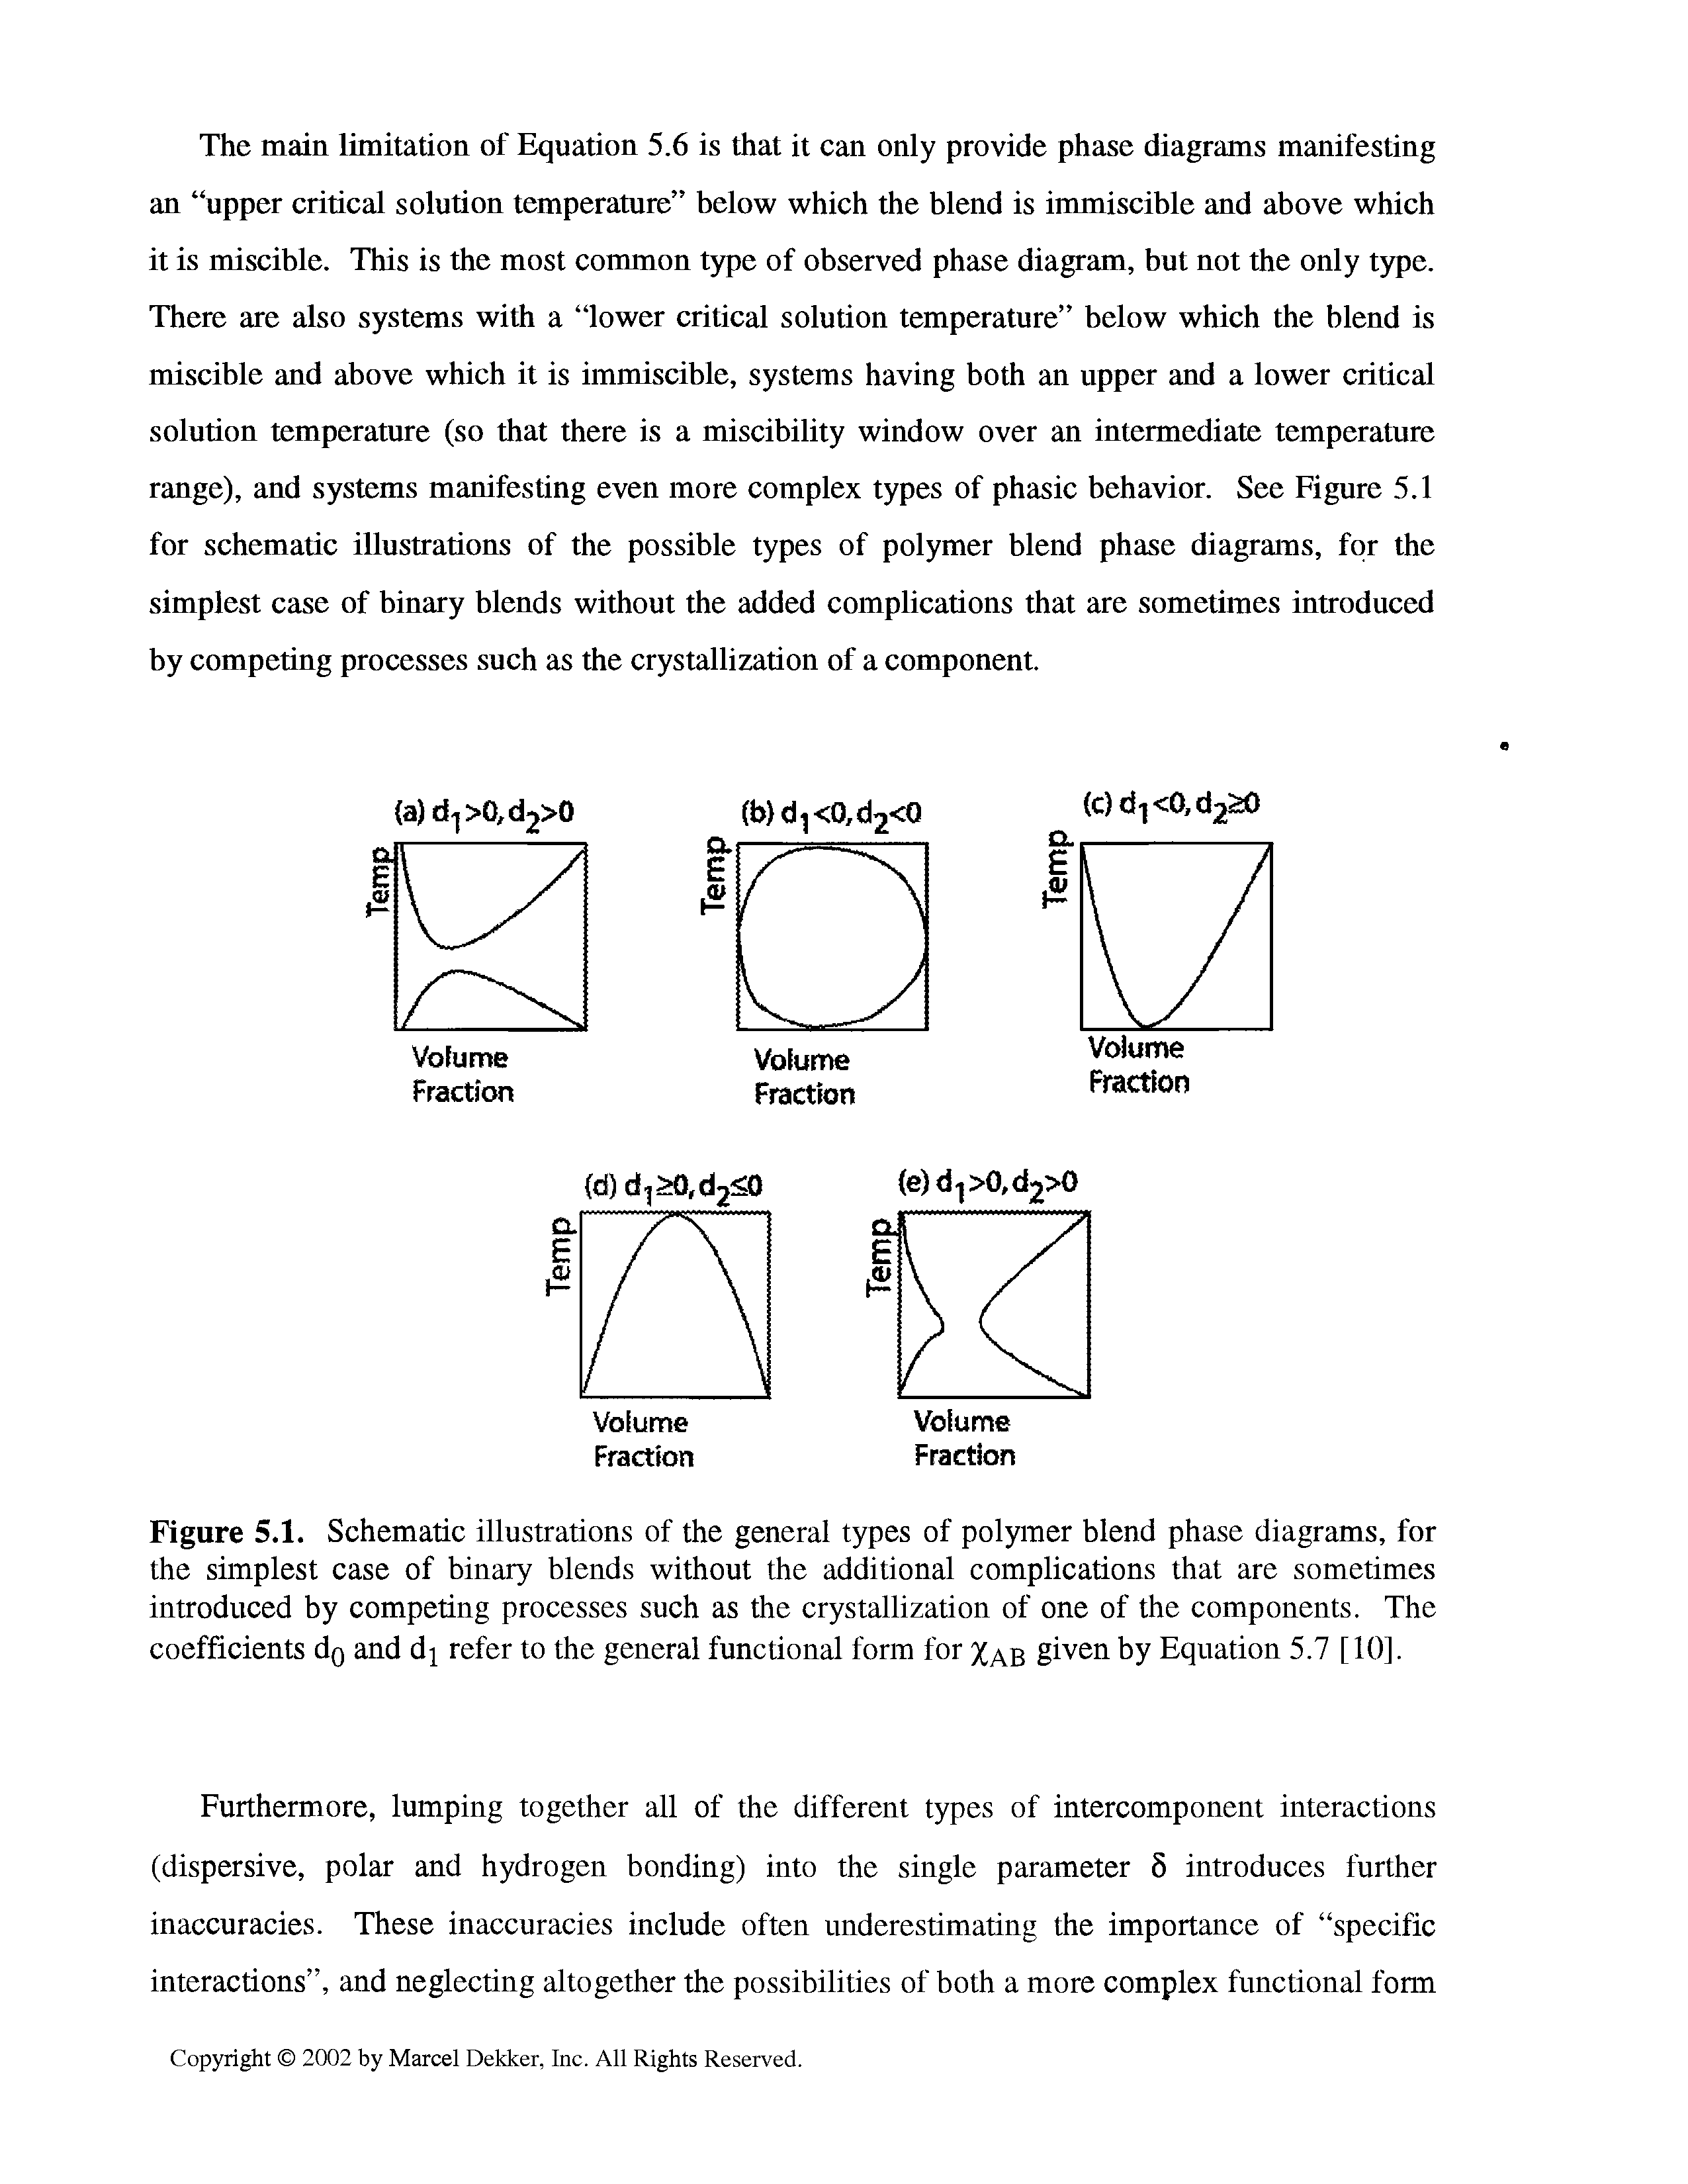 Figure 5.1. Schematic illustrations of the general types of polymer blend phase diagrams, for the simplest case of binary blends without the additional complications that are sometimes introduced by competing processes such as the crystallization of one of the components. The coefficients dg and d refer to the general functional form for %Ag given by Equation 5.7 [10].